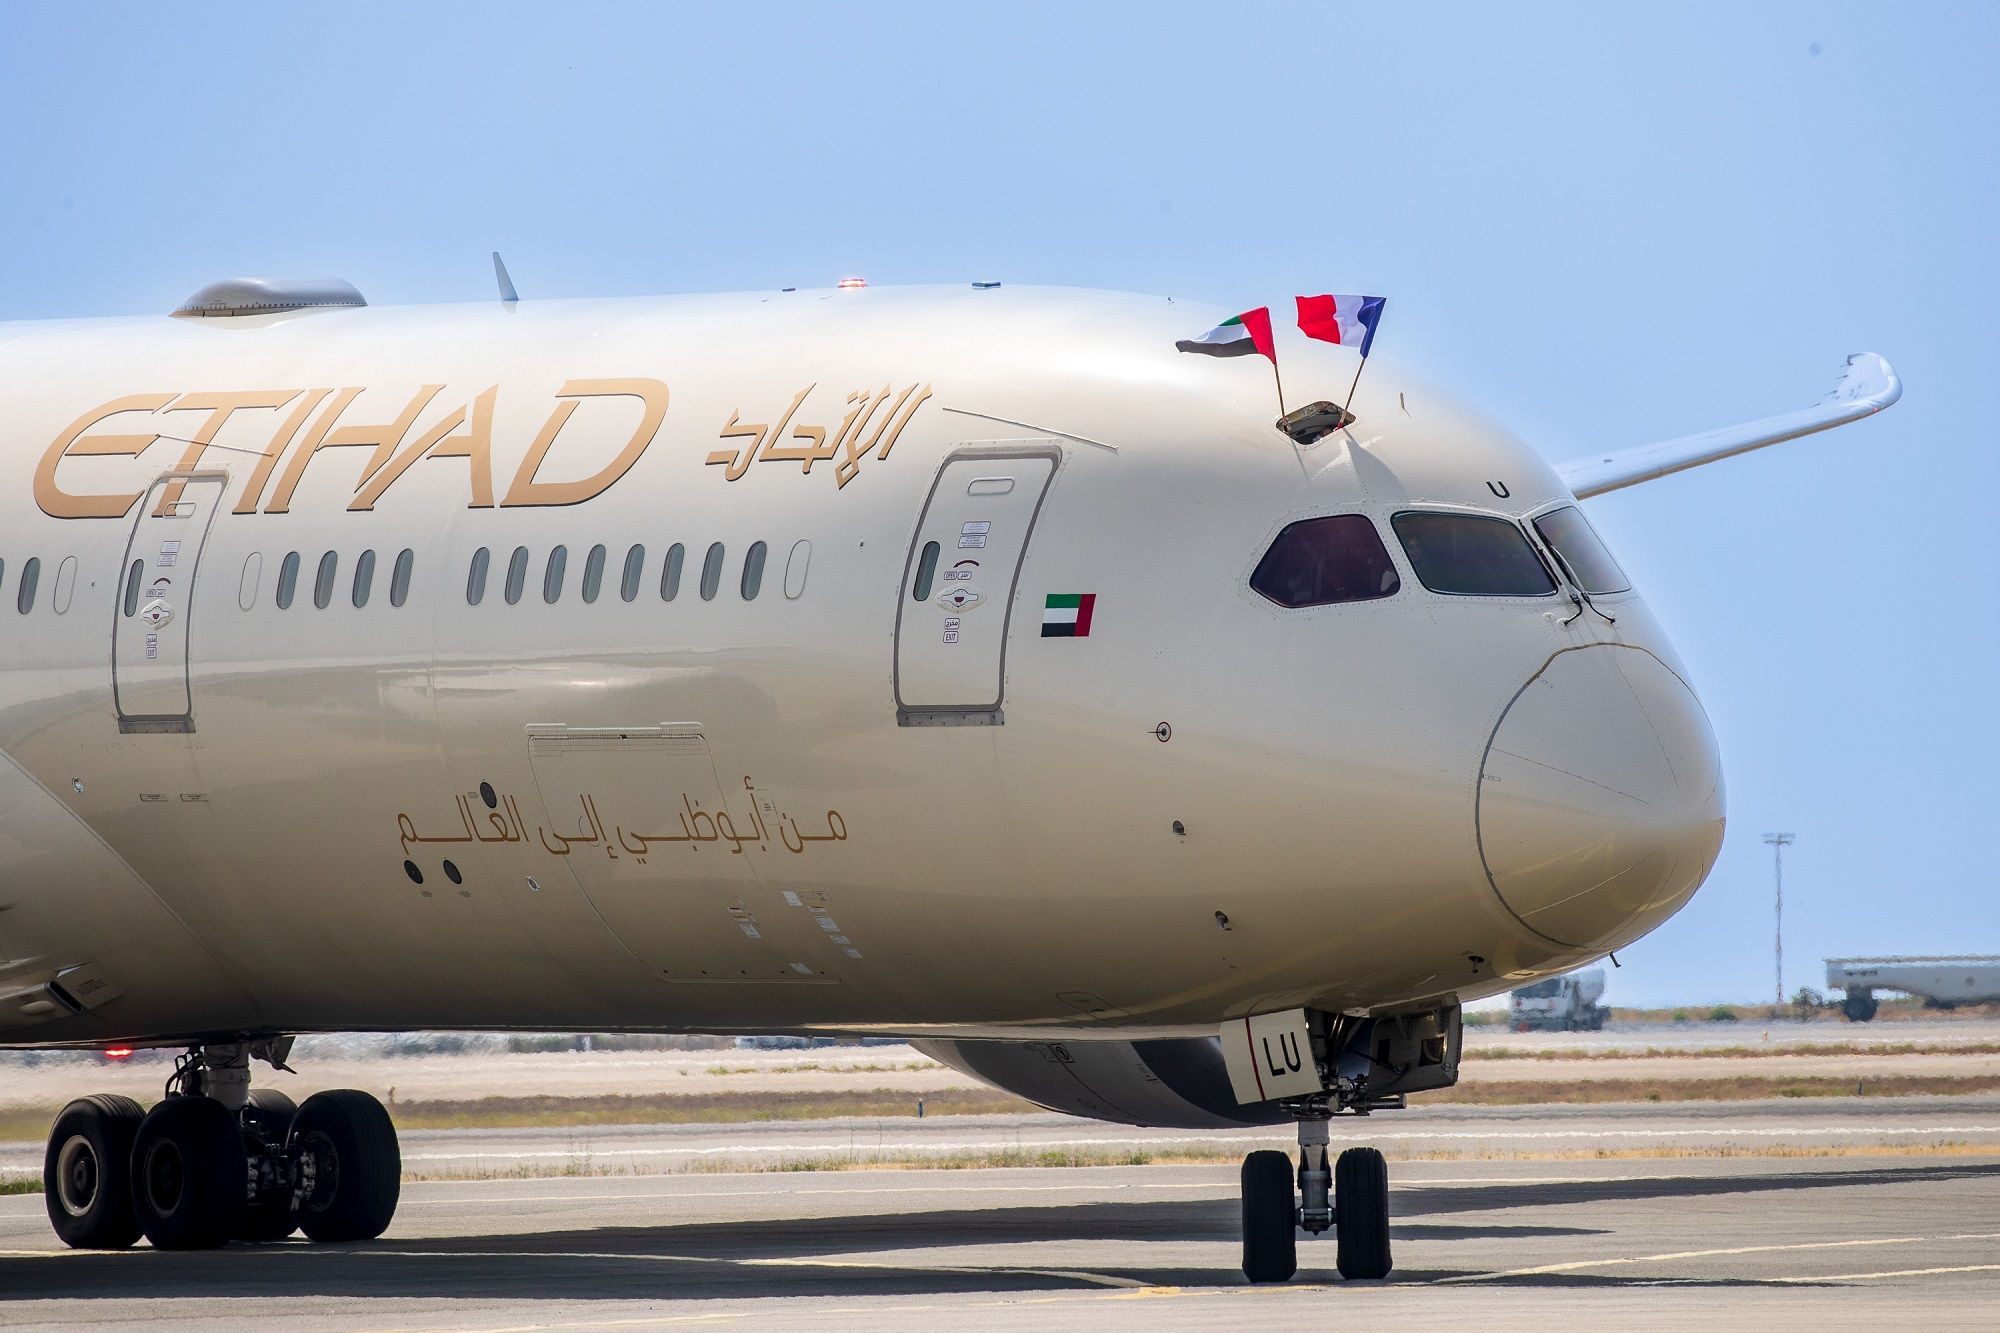 Etihad Airways pilots wave French and UAE flags after the carrier's first Abu Dhabi-Nice flight touches down on 15 June 2022, one of five seasonal routes that the airline is operating during the 2022 summer season